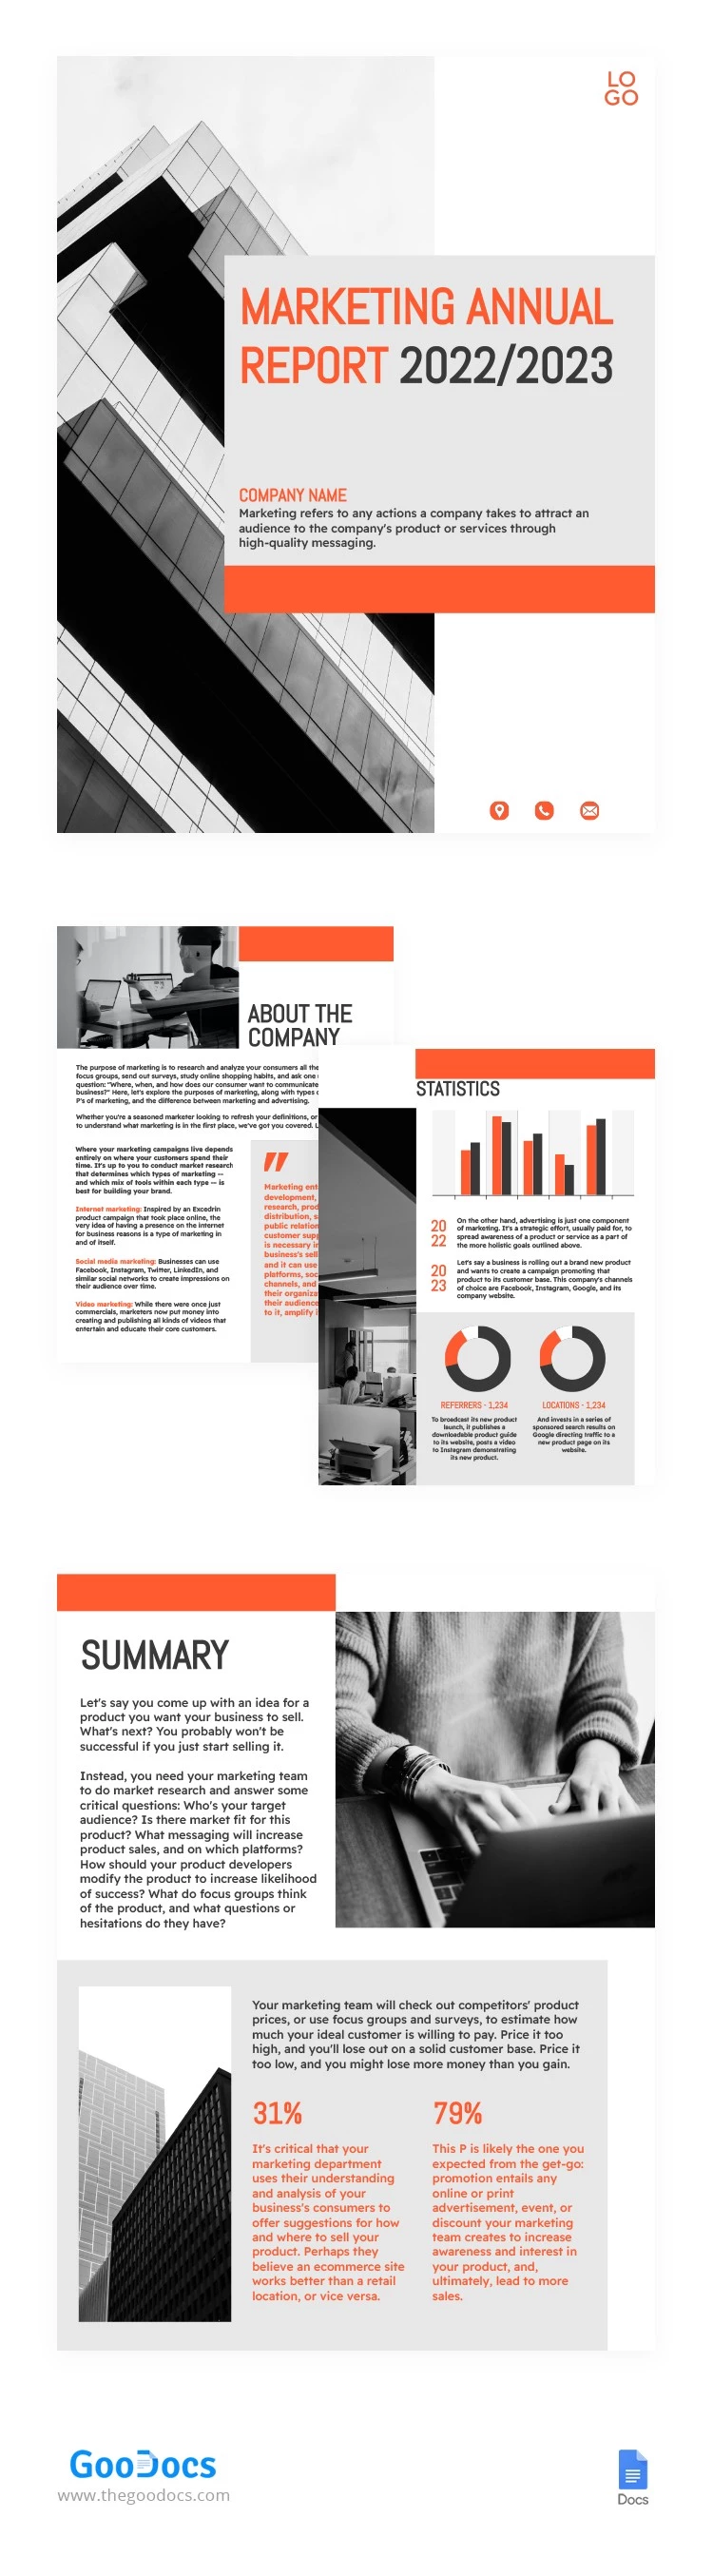 Marketing Annual Report with Orange - free Google Docs Template - 10064738